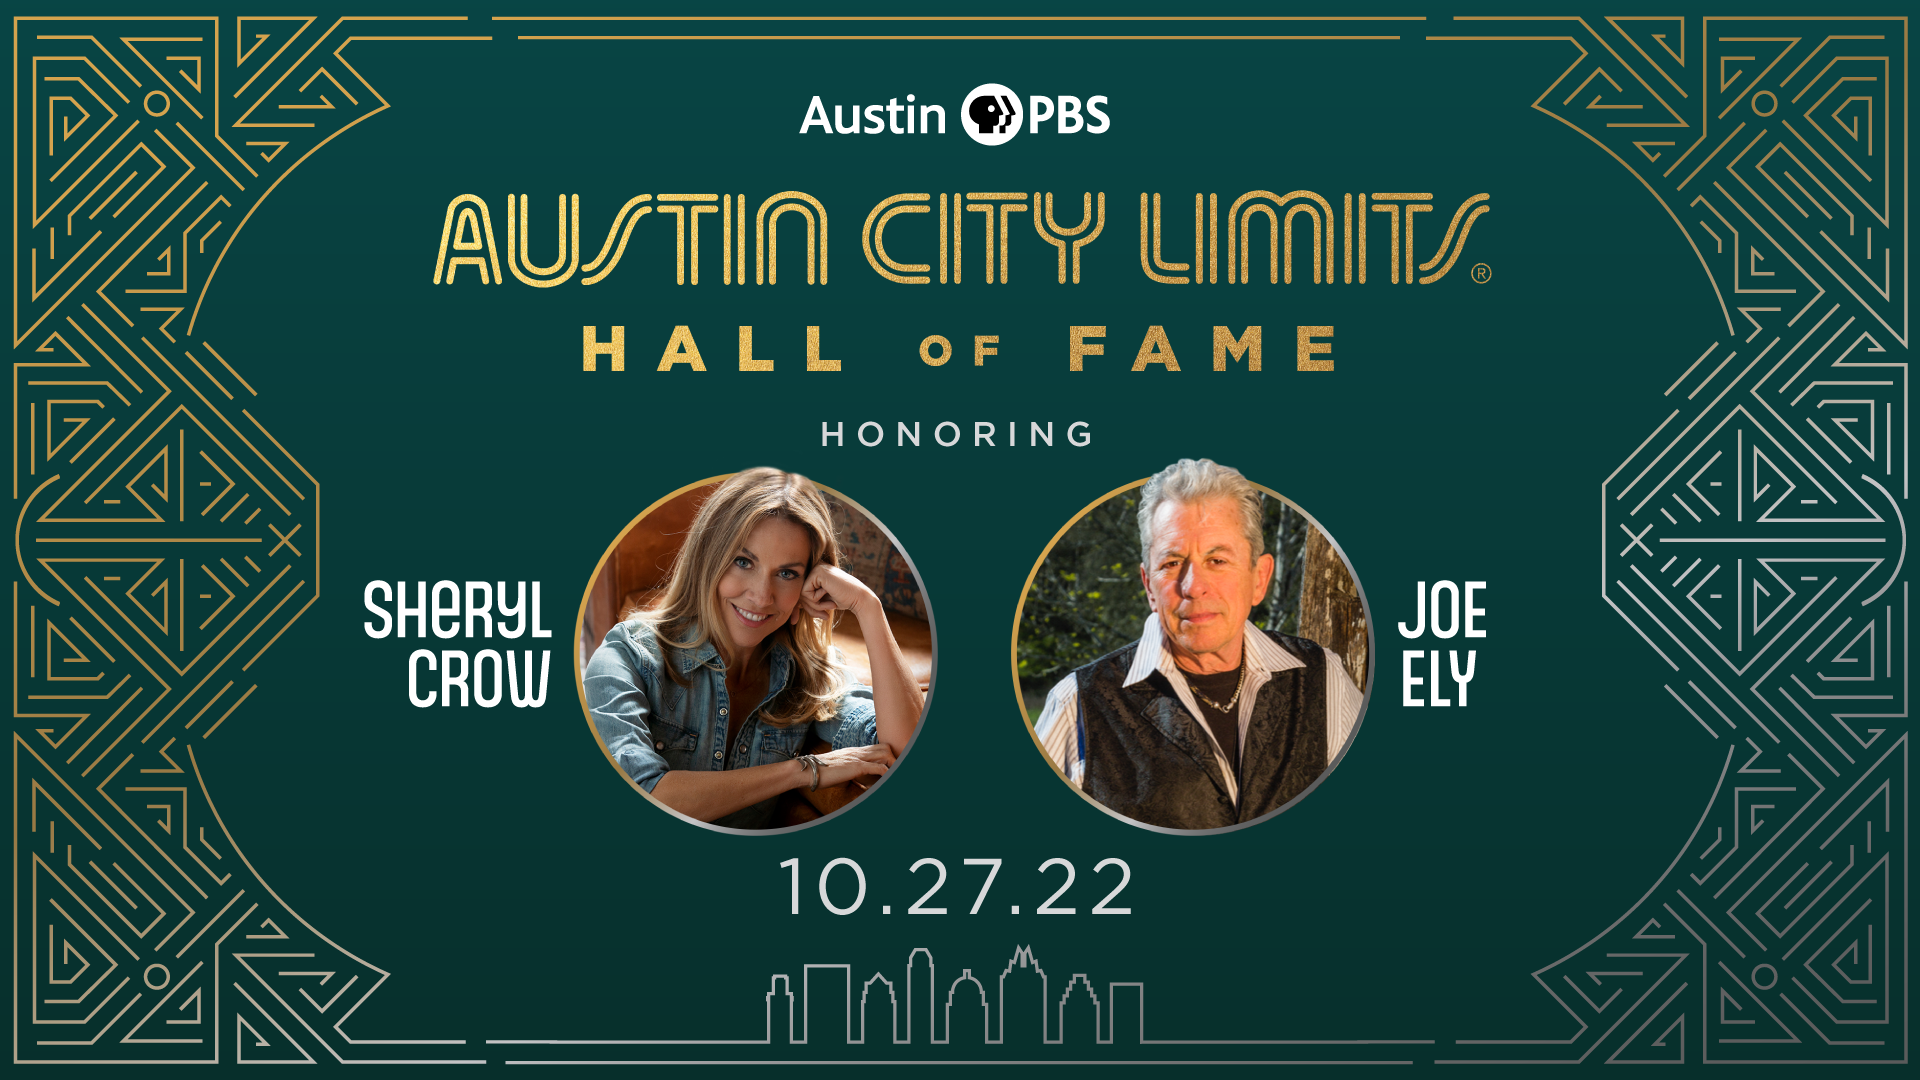 ACL Hall Of Fame Honoring Sheryl Crow and Joe Ely